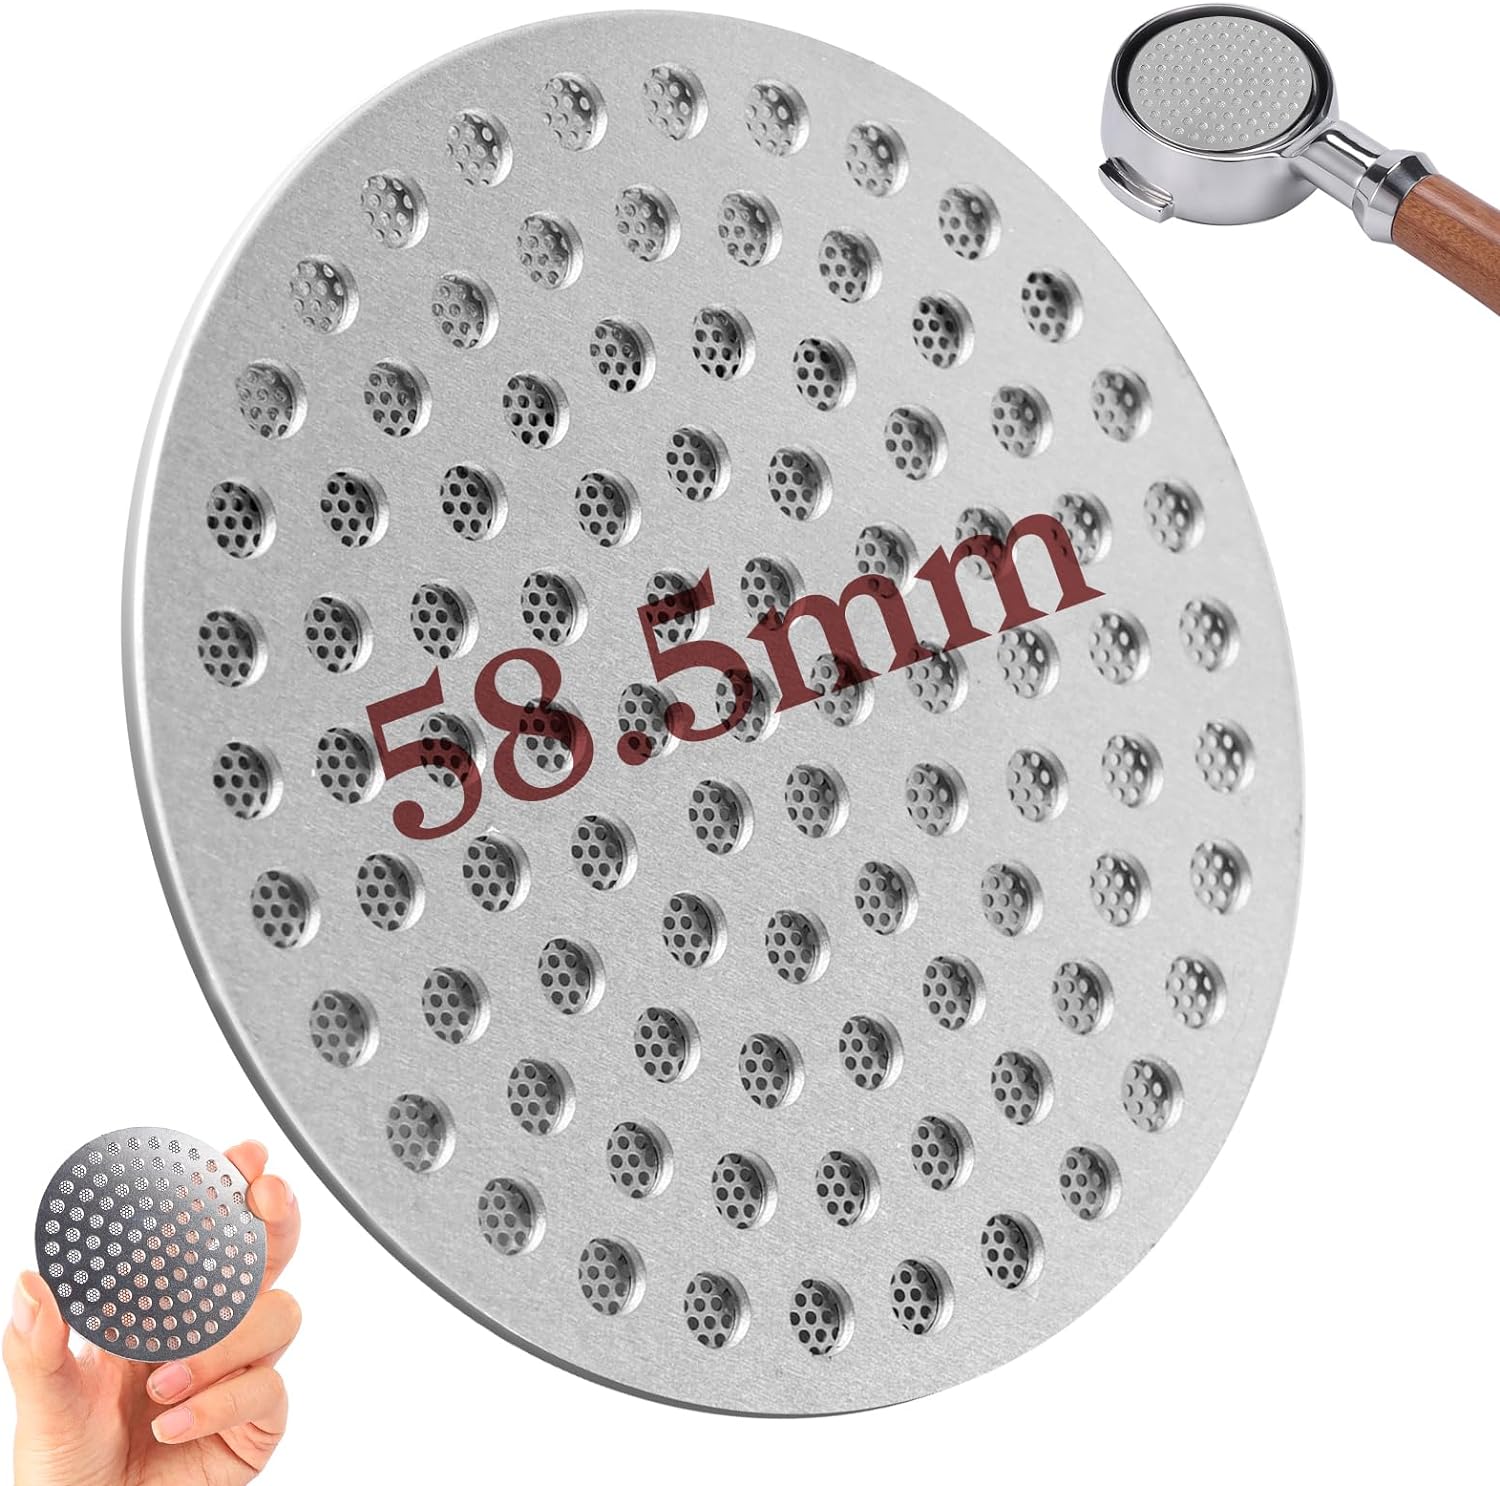 EclipSeguard Puck Screen, Espresso Strainer for Portatilter, 304 Stainless Steel Coffee Puck Filter Strainer, 1.7 mm Thick, Reusable Portafilter, Coffee Portatilter Lower Shower Strainer, Silver (58.5